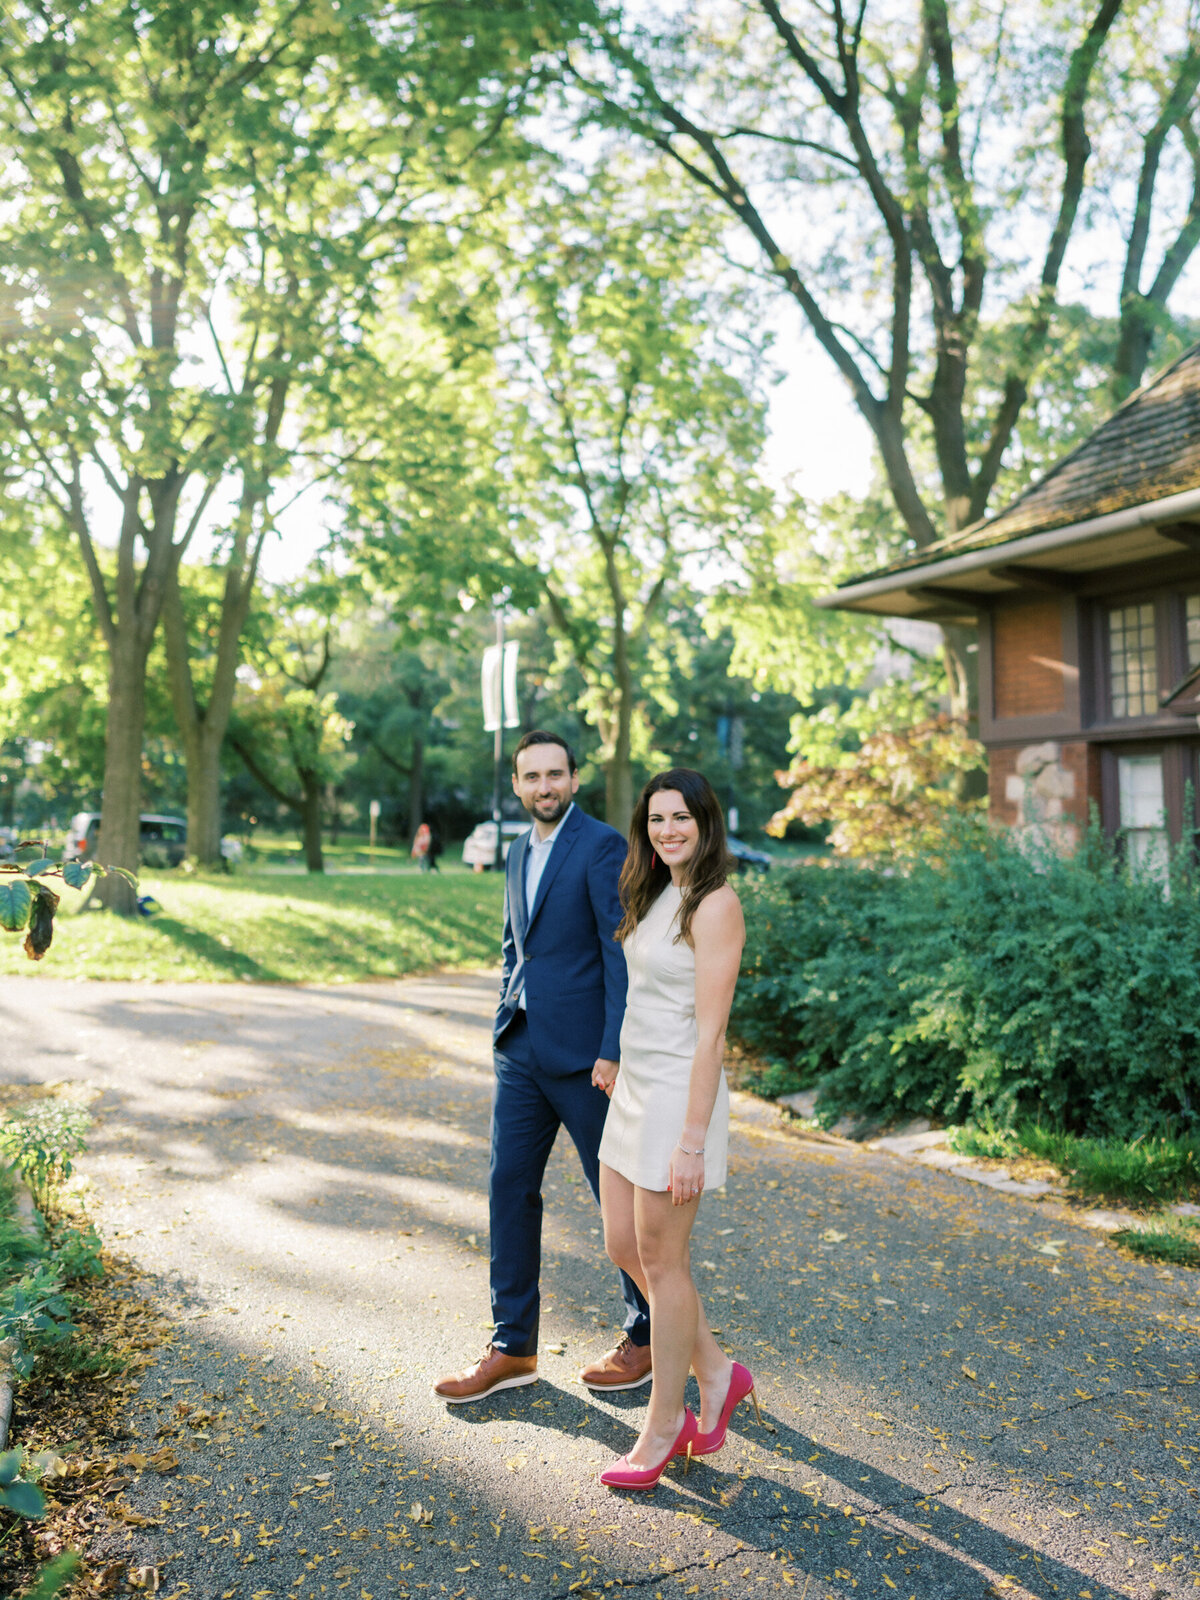 Lincoln Park Chicago Fall Engagement Session Highlights | Amarachi Ikeji Photography 04